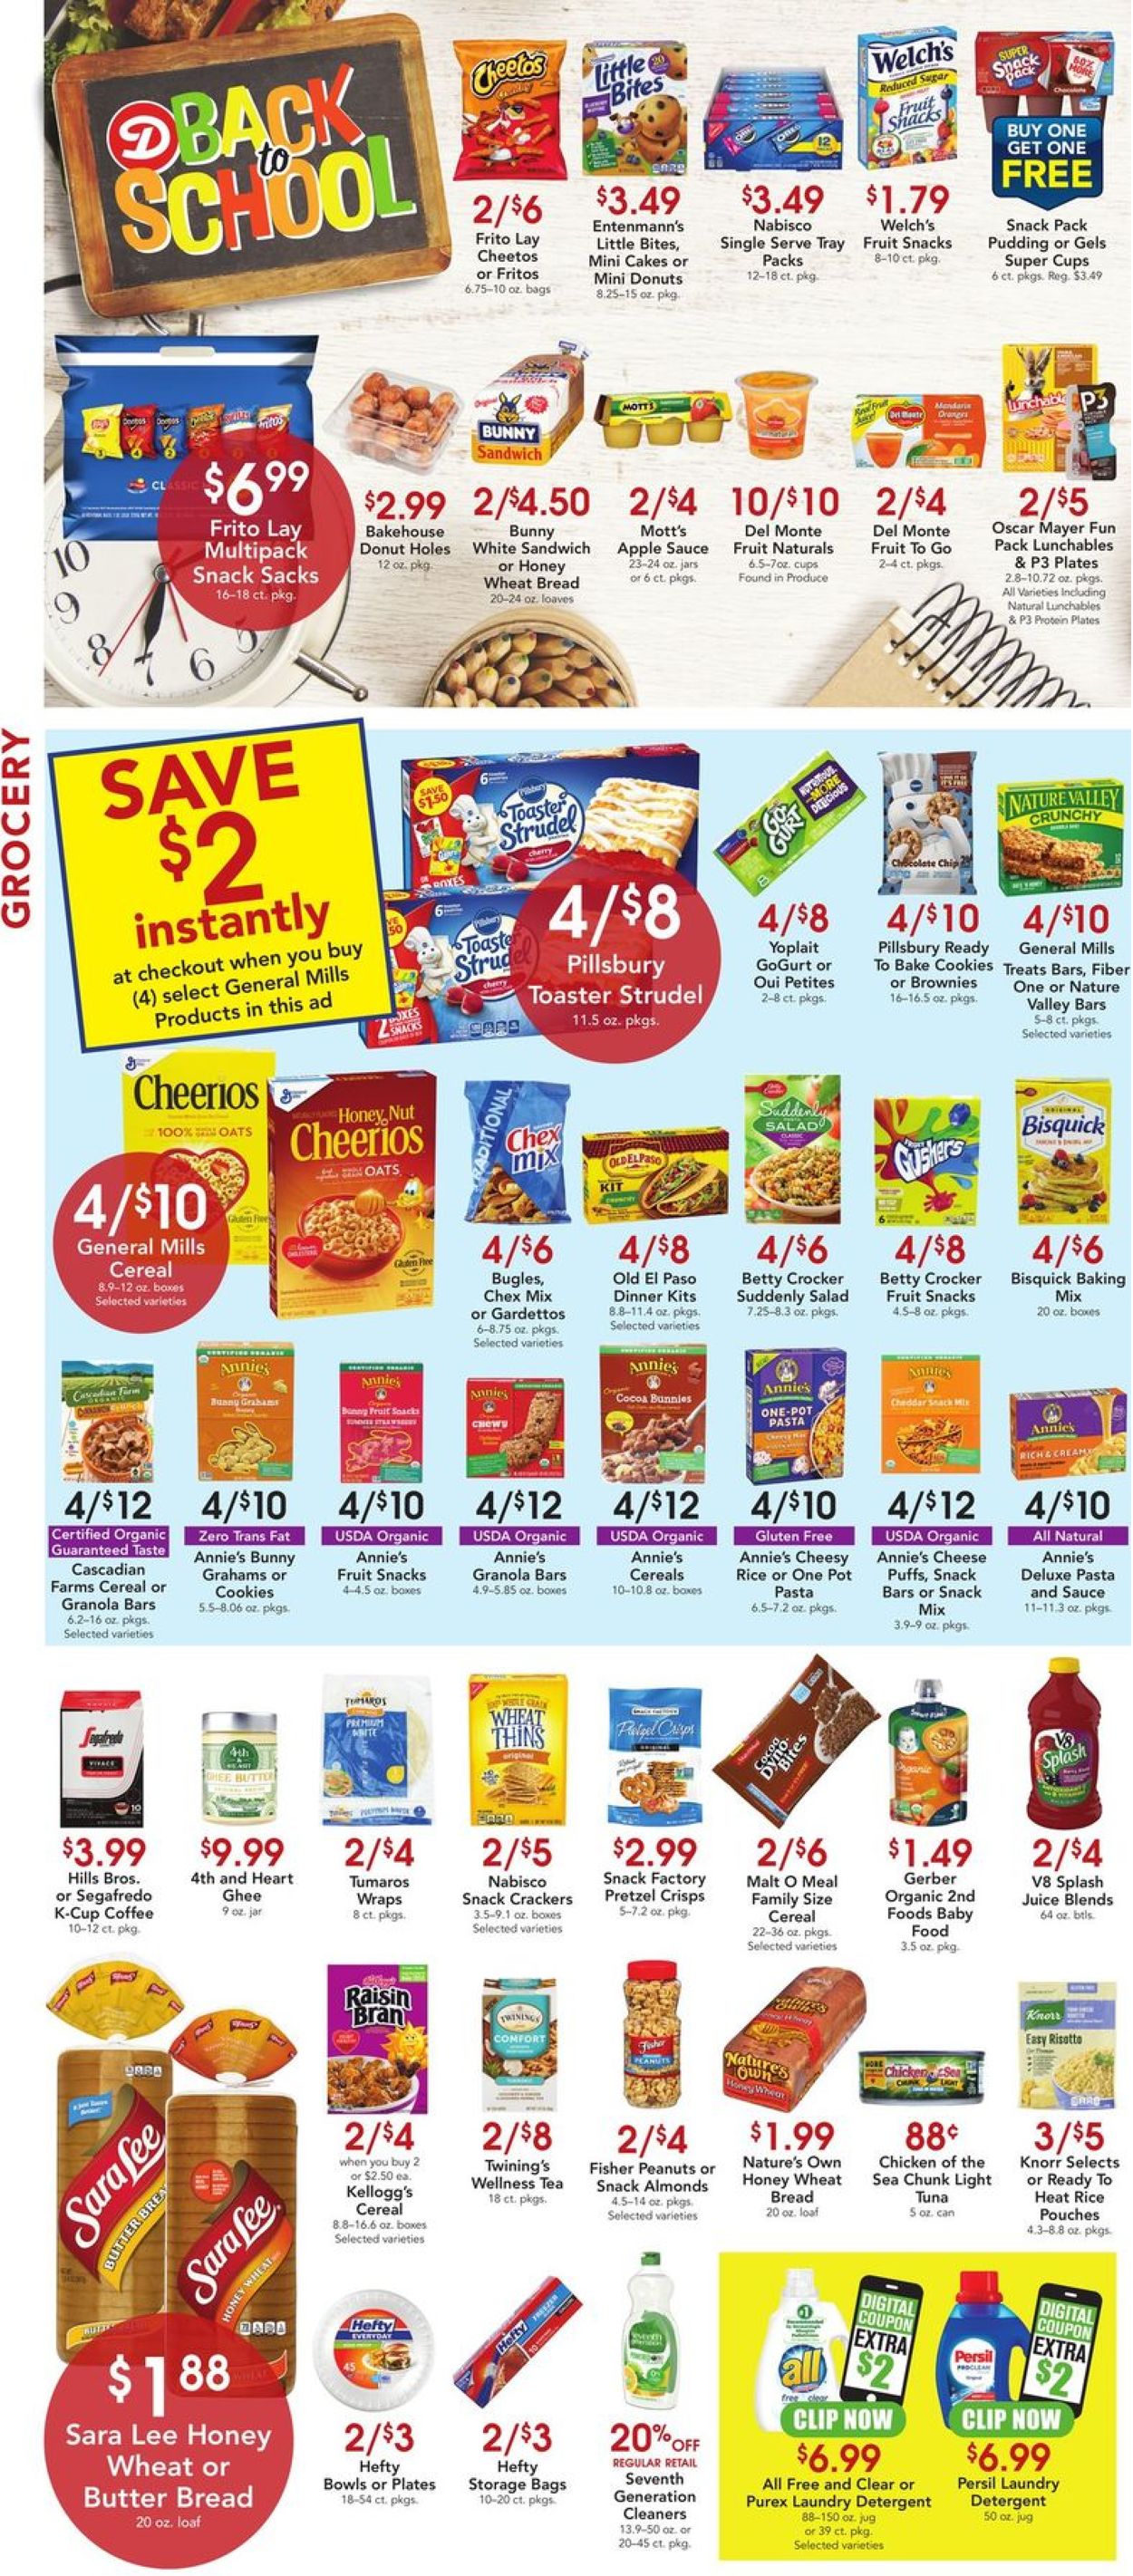 Catalogue Dierbergs from 08/11/2020